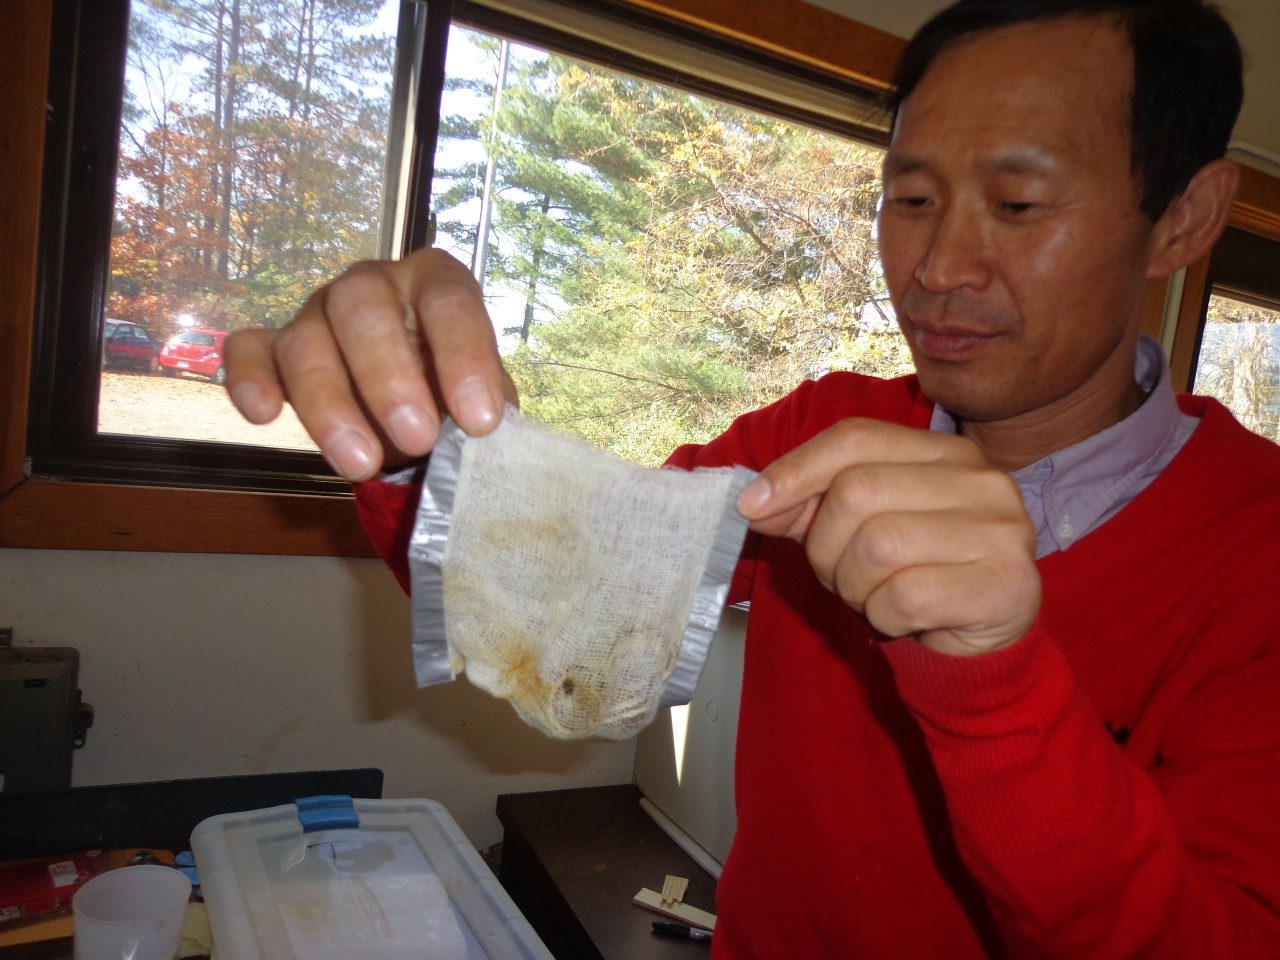 Research Scientist Zhangjing Chen displays a cheesecloth bag containing invasive snails. The snails were secured in bags before the researchers tested their vacuum-steam treatment for eradicating snails from shipments of imported tile.